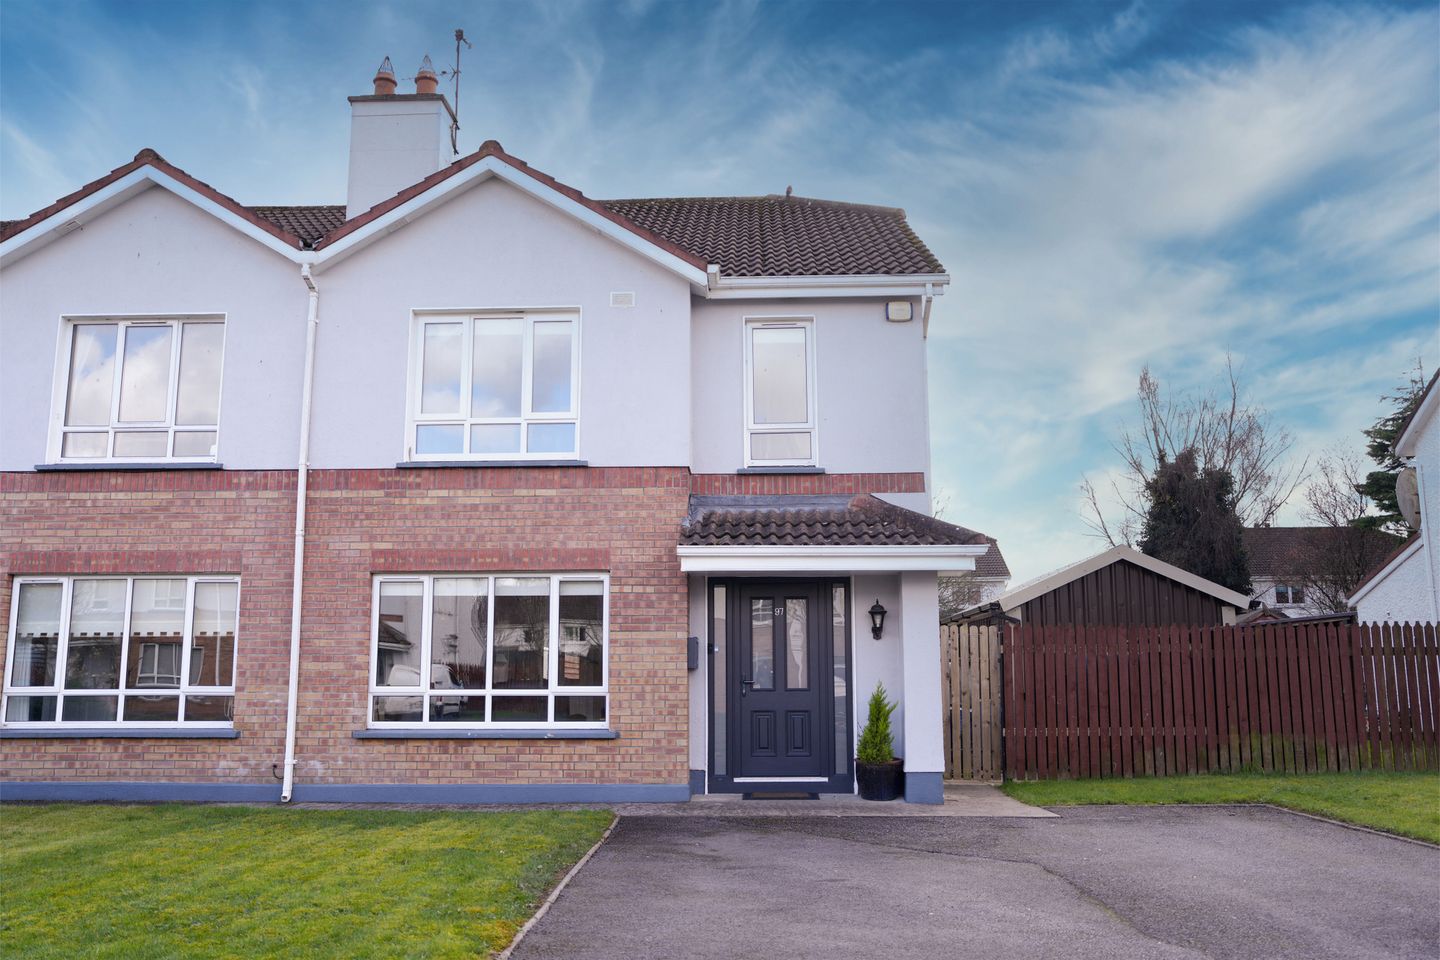 97 Clonminch Woods, Tullamore, Co. Offaly, R35TE82